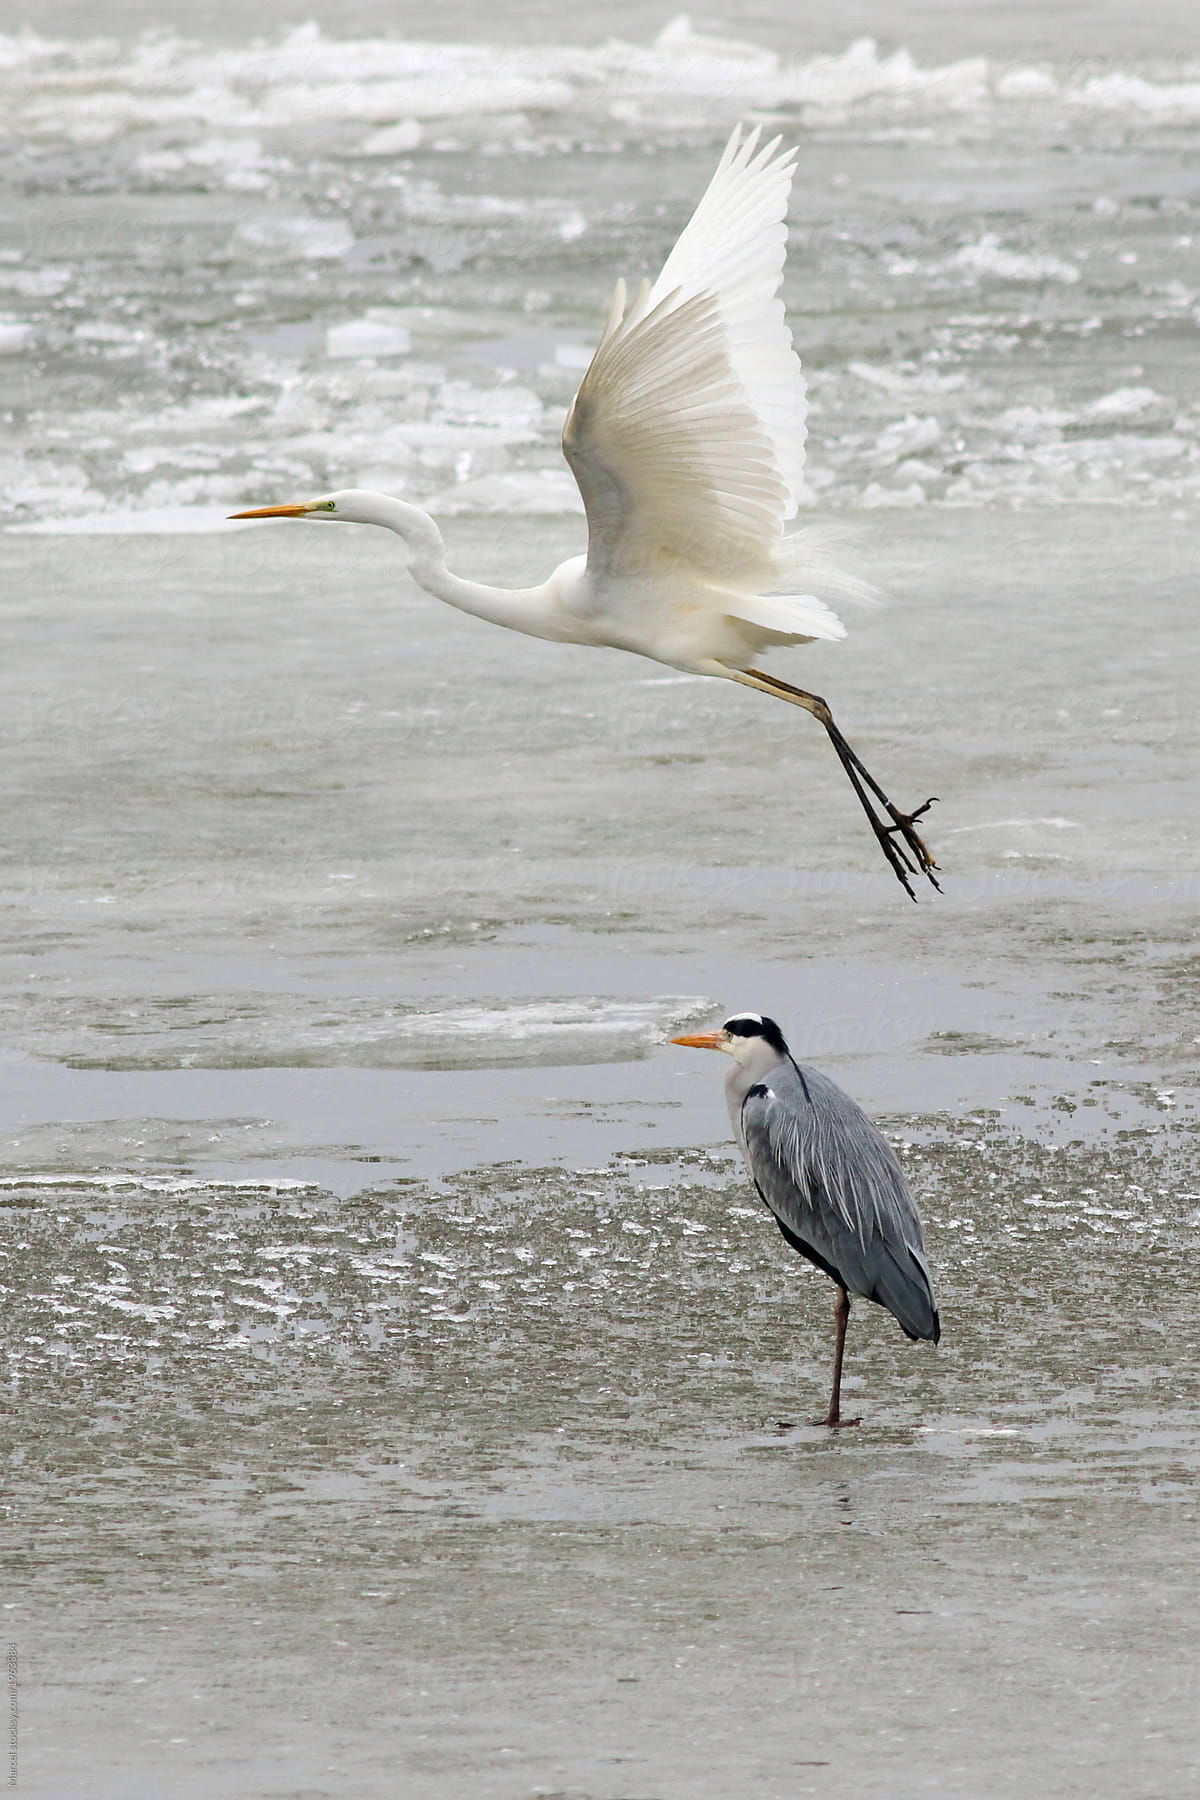 Great white egret flying over a heron on ice